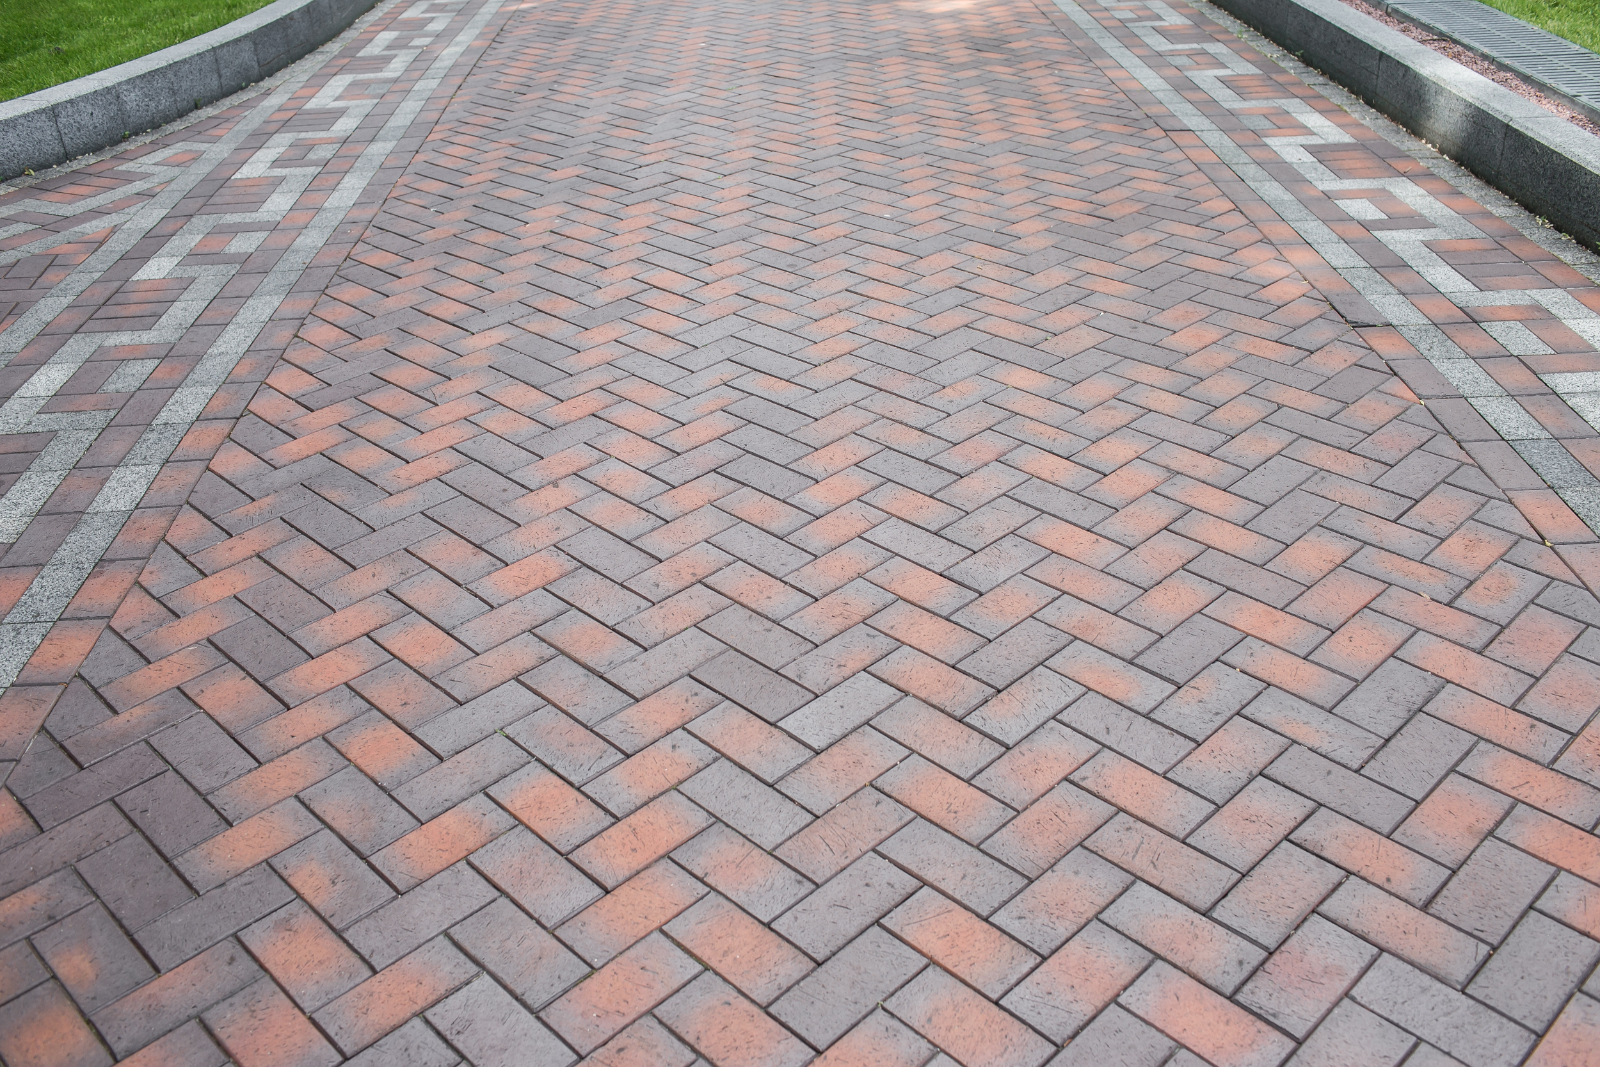 How Long Does It Take To Install Paving? Paving Specialists Working Throughout Southend And Essex